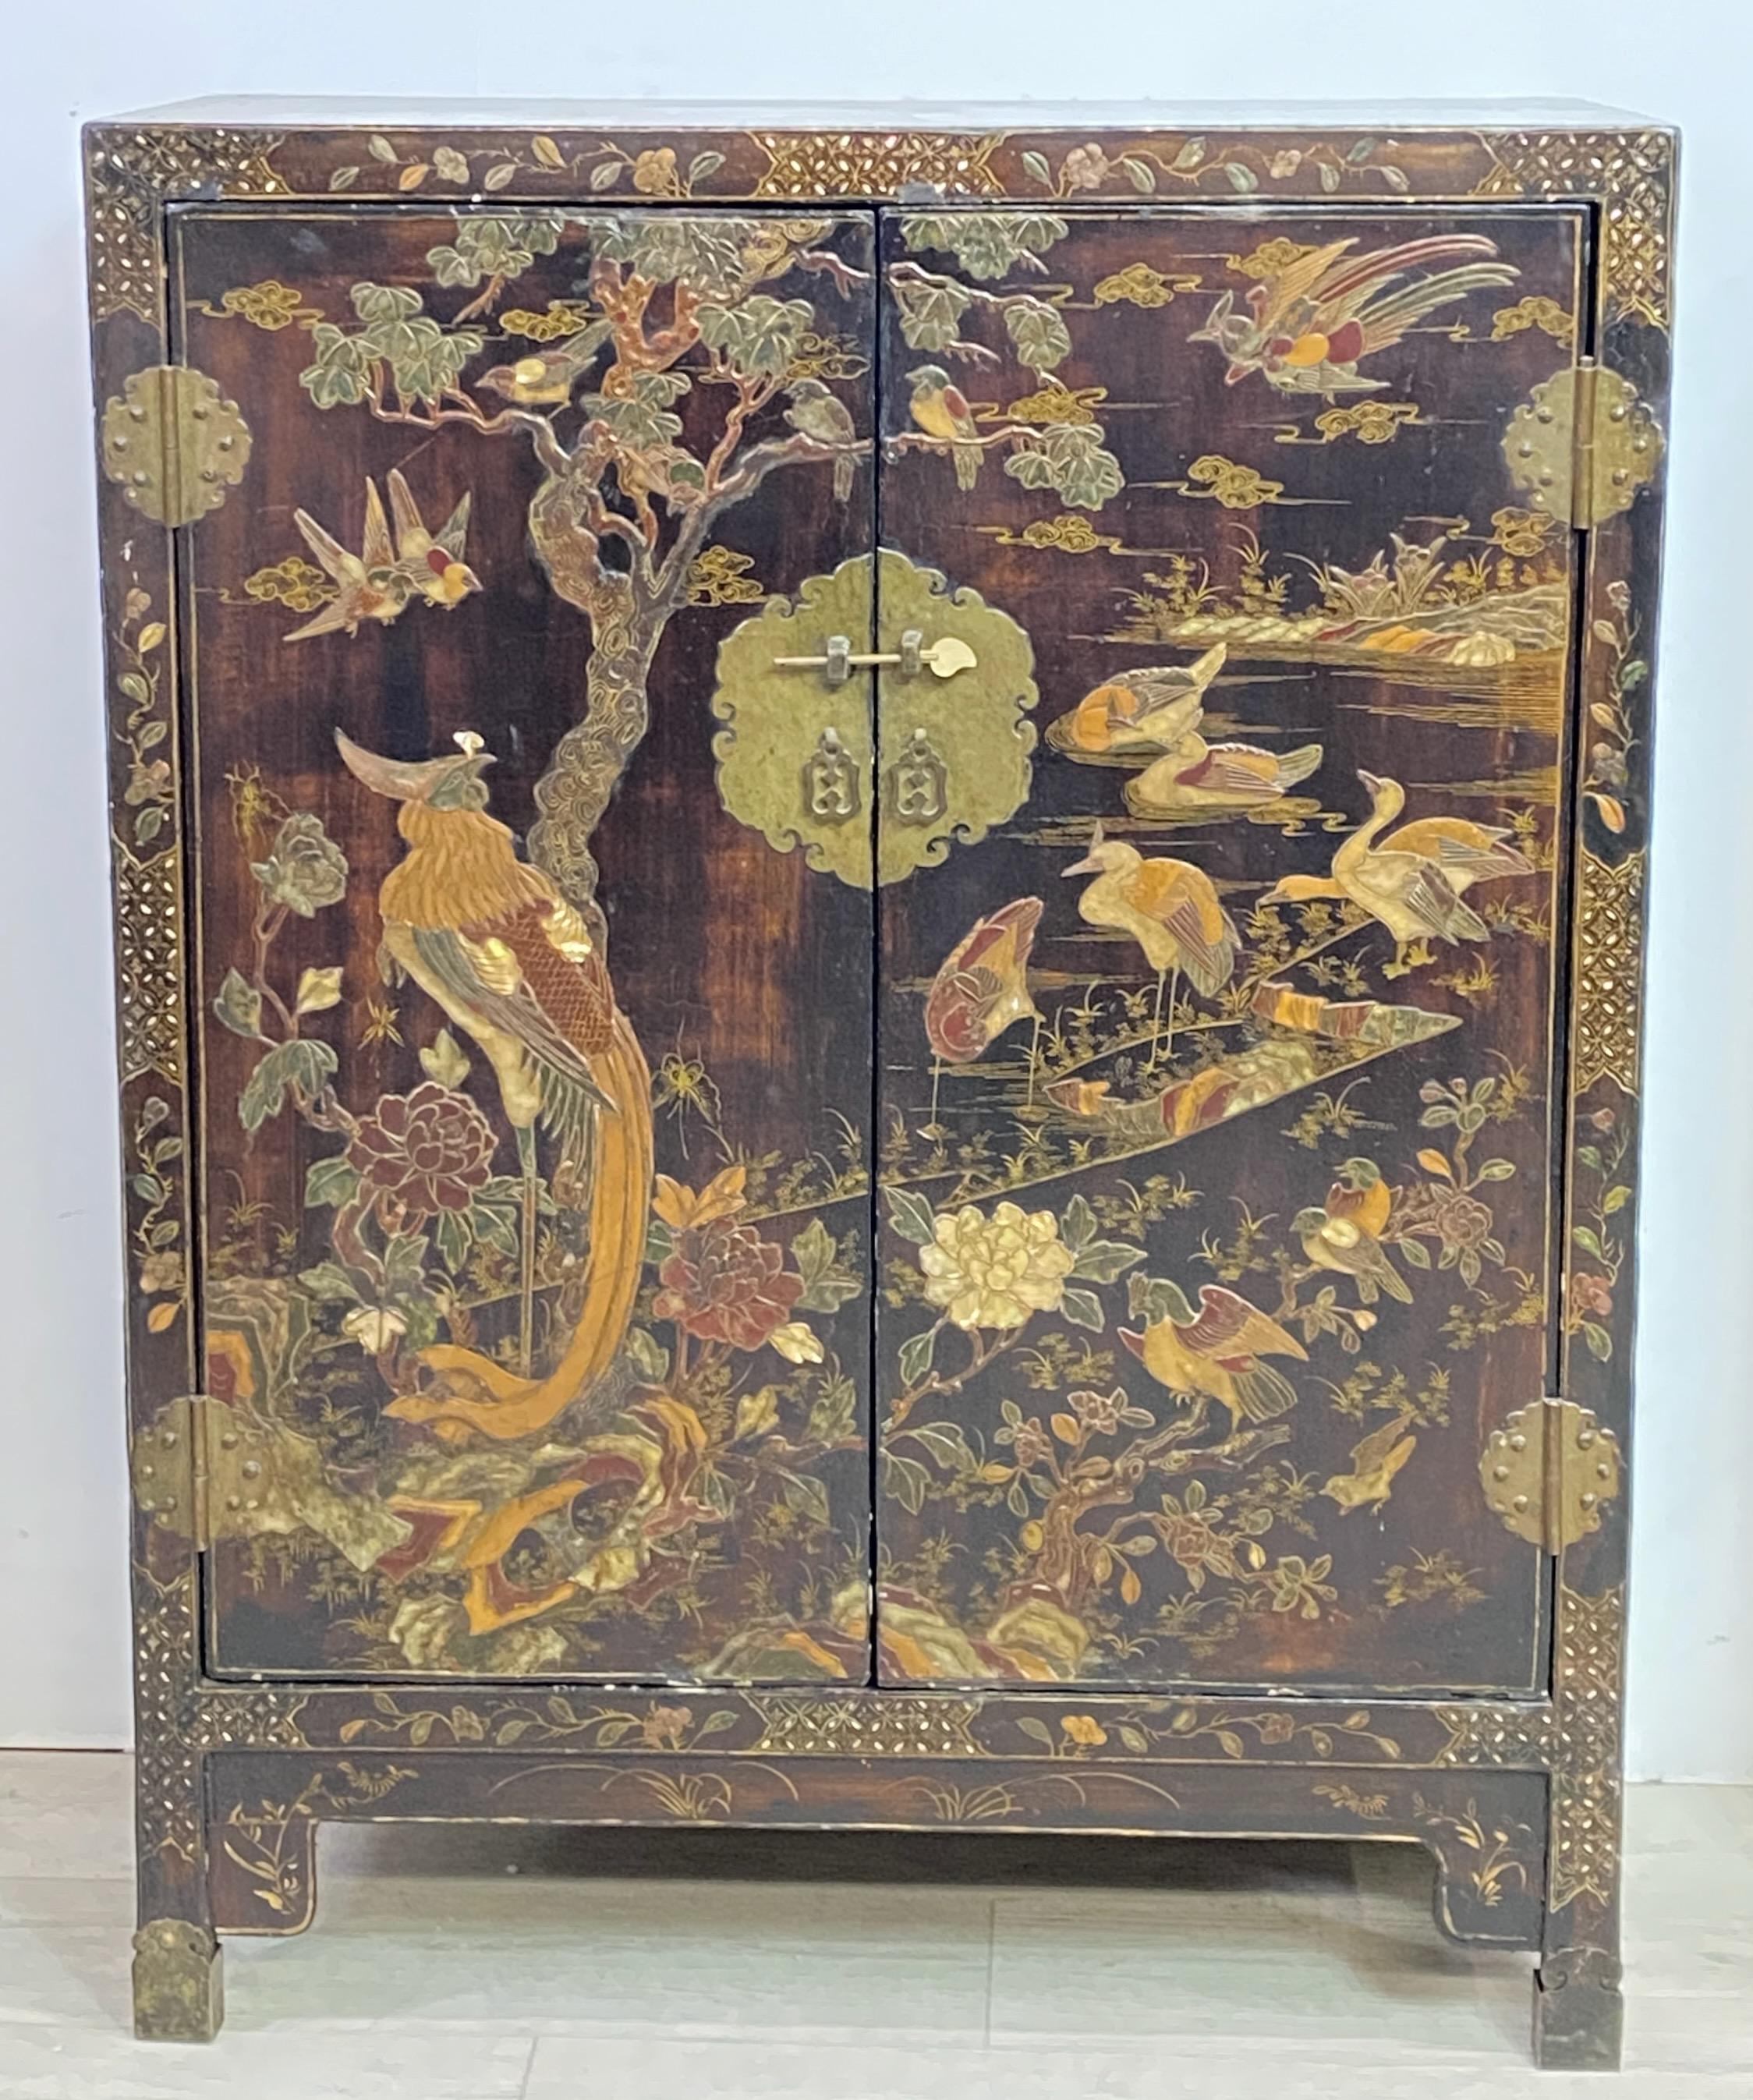  Pair of Chinese Laquer and Hardstone Cabinets, Late 19th - Early 20th Century In Good Condition For Sale In San Francisco, CA